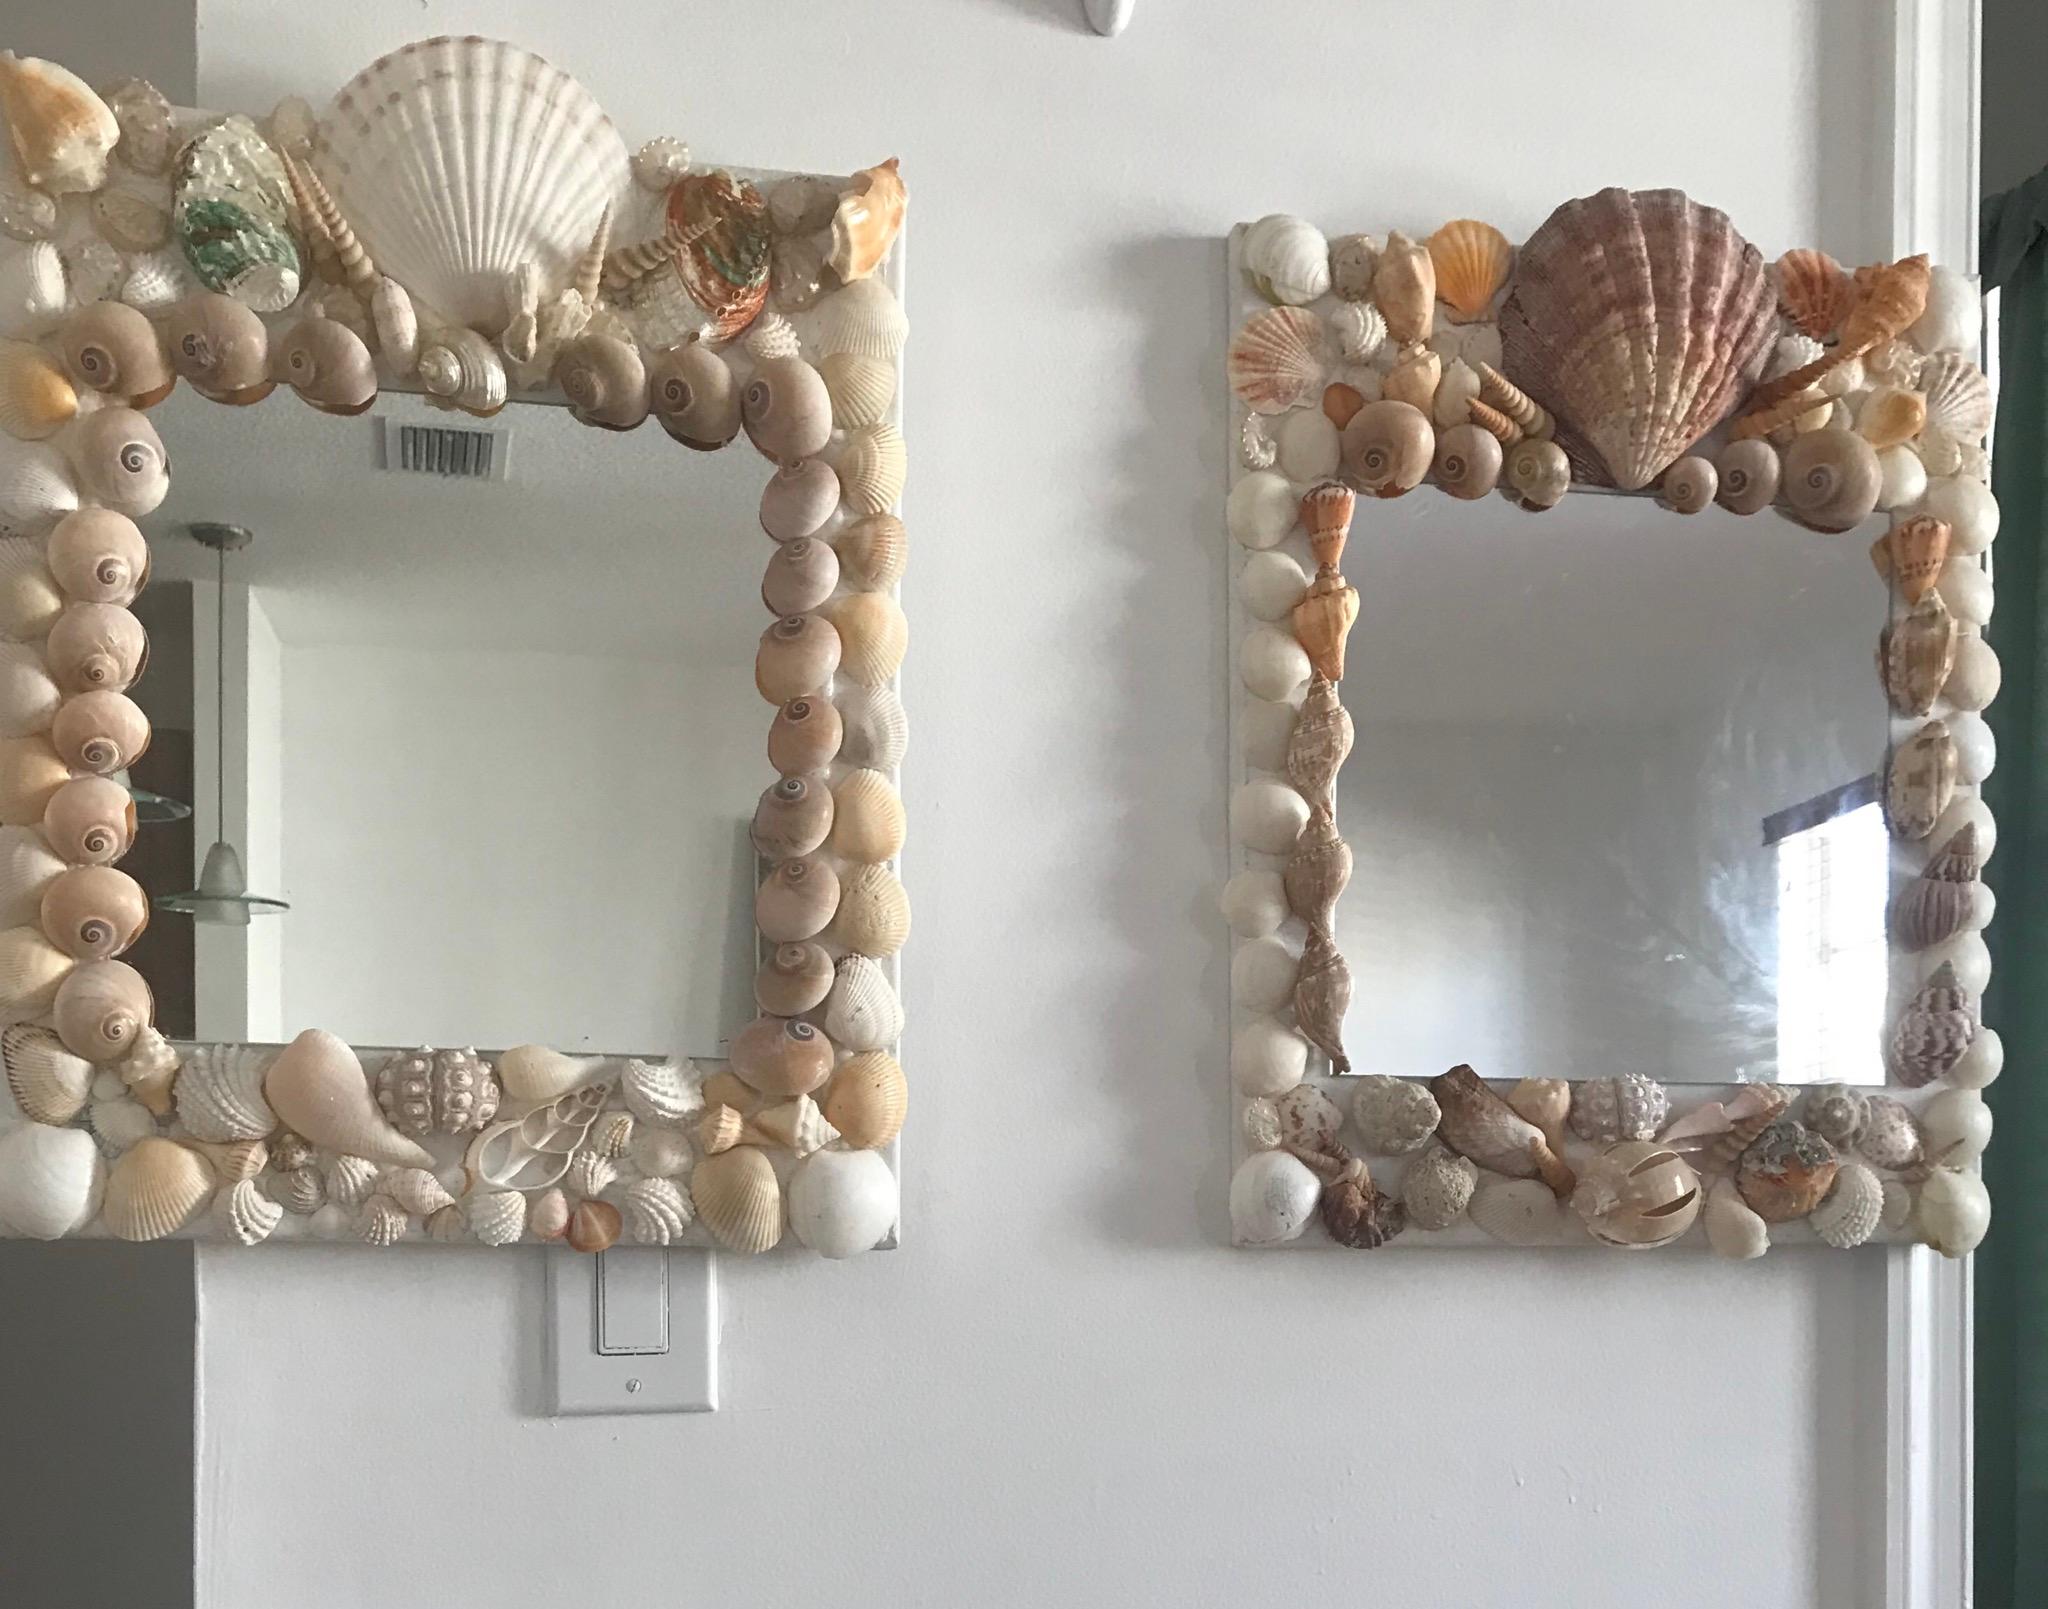 Square mirrors with shells on canvas frame.